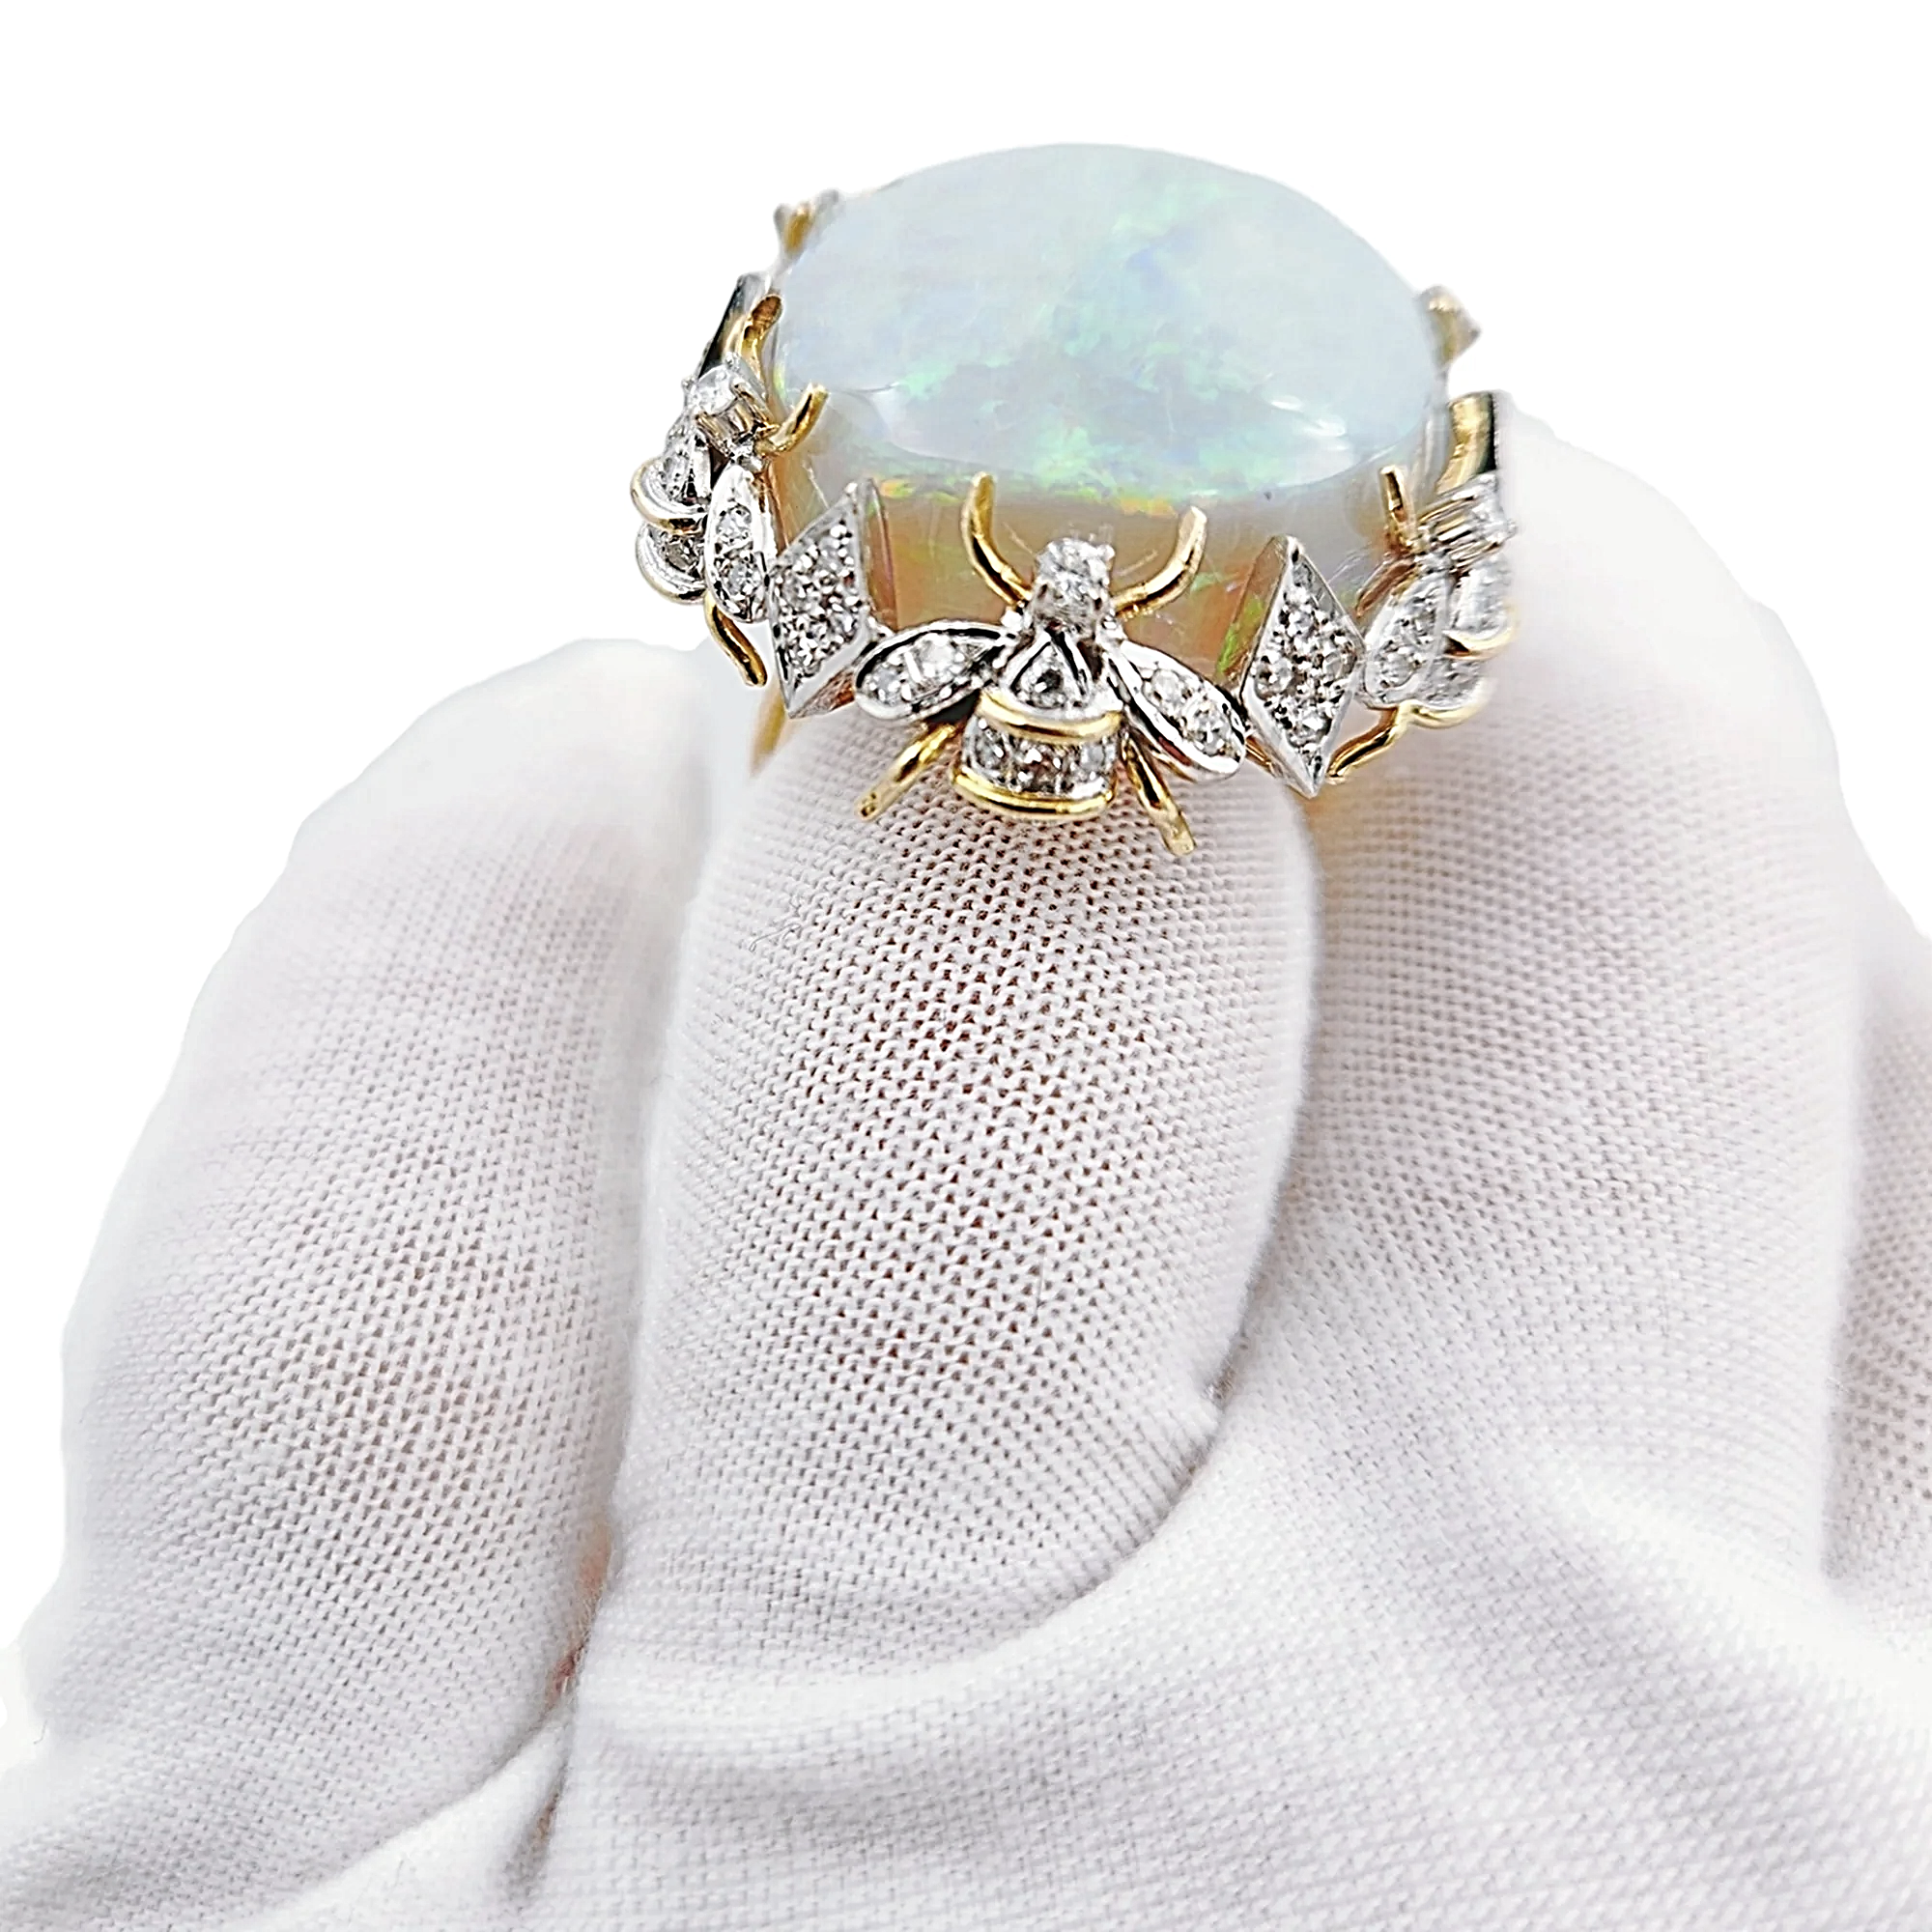 45CT Australian Multi Color Fiery Antique Art Deco Fancy Rainbow Crystal Opal Ring with 1.00CT SI2-G Diamonds in 14K Yellow Gold.